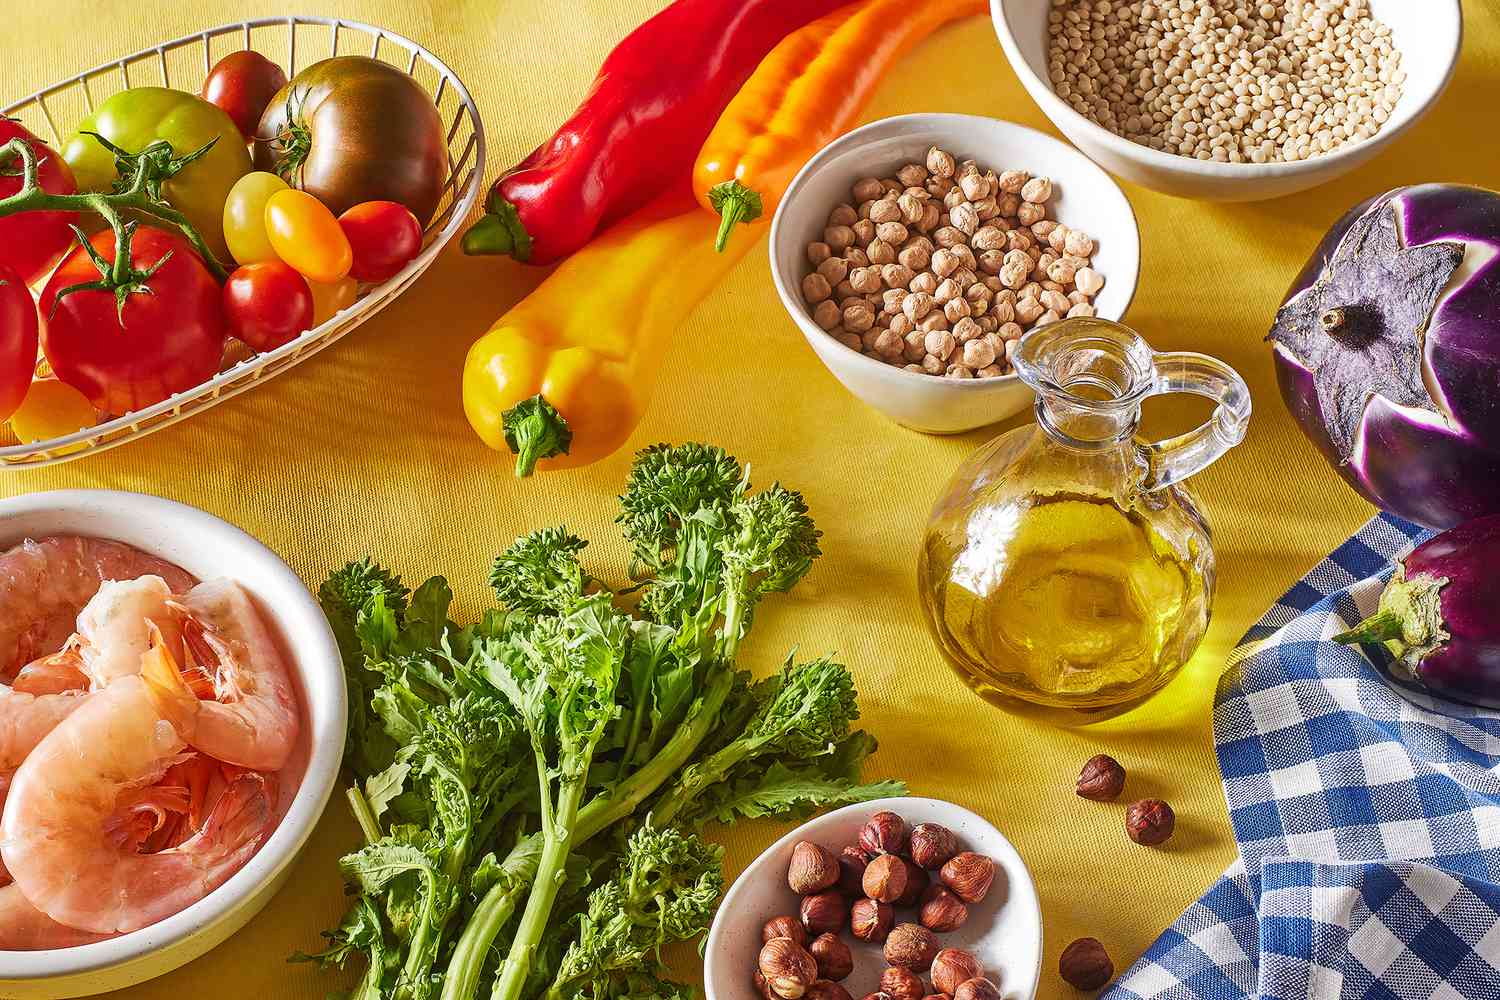 Mediterranean Diet foods that are great for heart health such as shrimp, fruit, nuts, vegetables, and grains